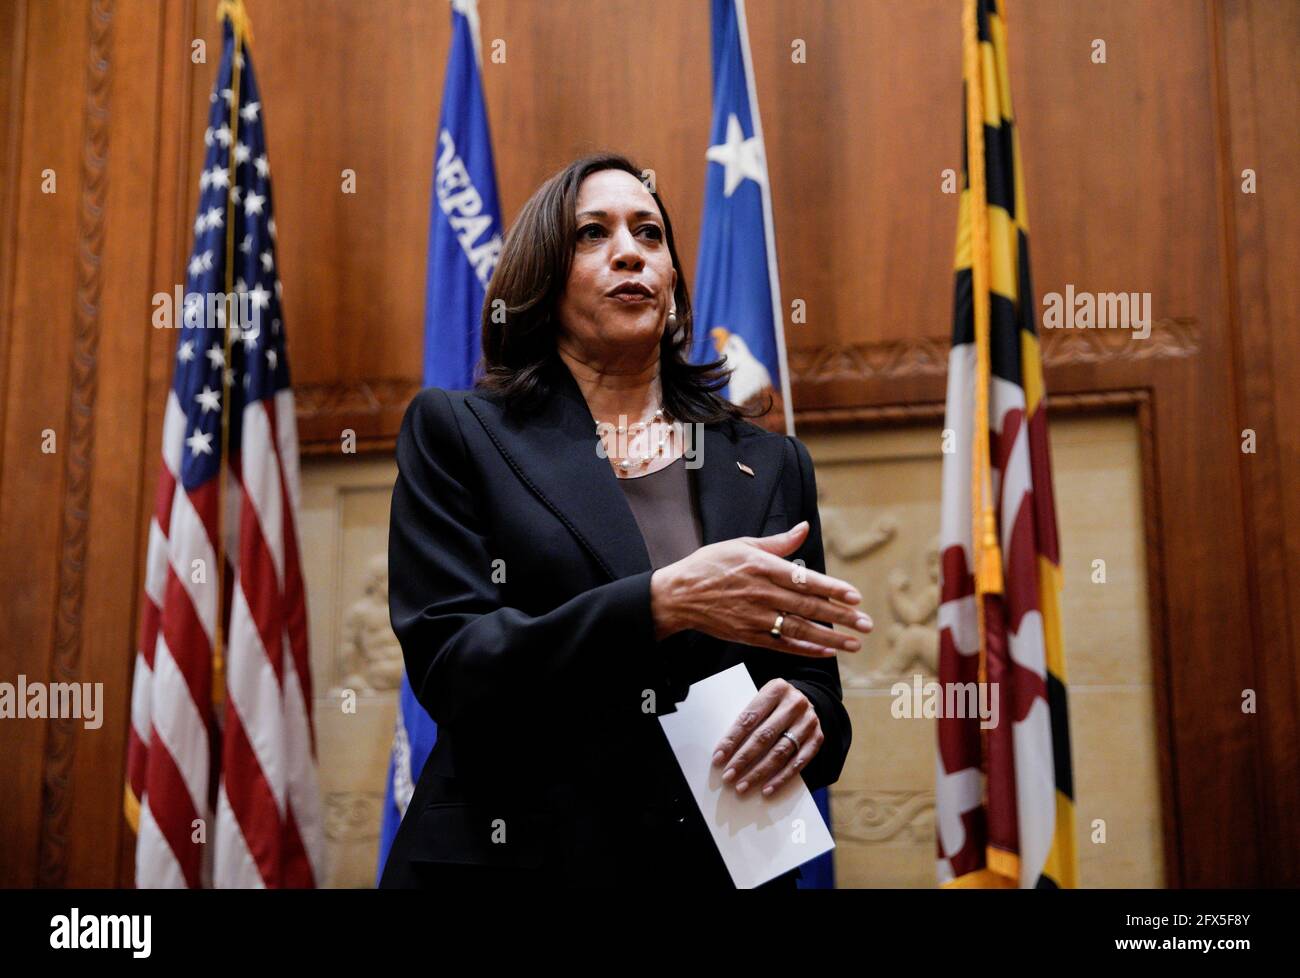 U.S. Vice President Kamala Harris delivers remarks about George Floyd after ceremonially swearing in Kristen Clarke as Assistant Attorney General for the Civil Rights Division at the Department of Justice in Washington, U.S., May 25, 2021. REUTERS/Yuri Gripas Stock Photo